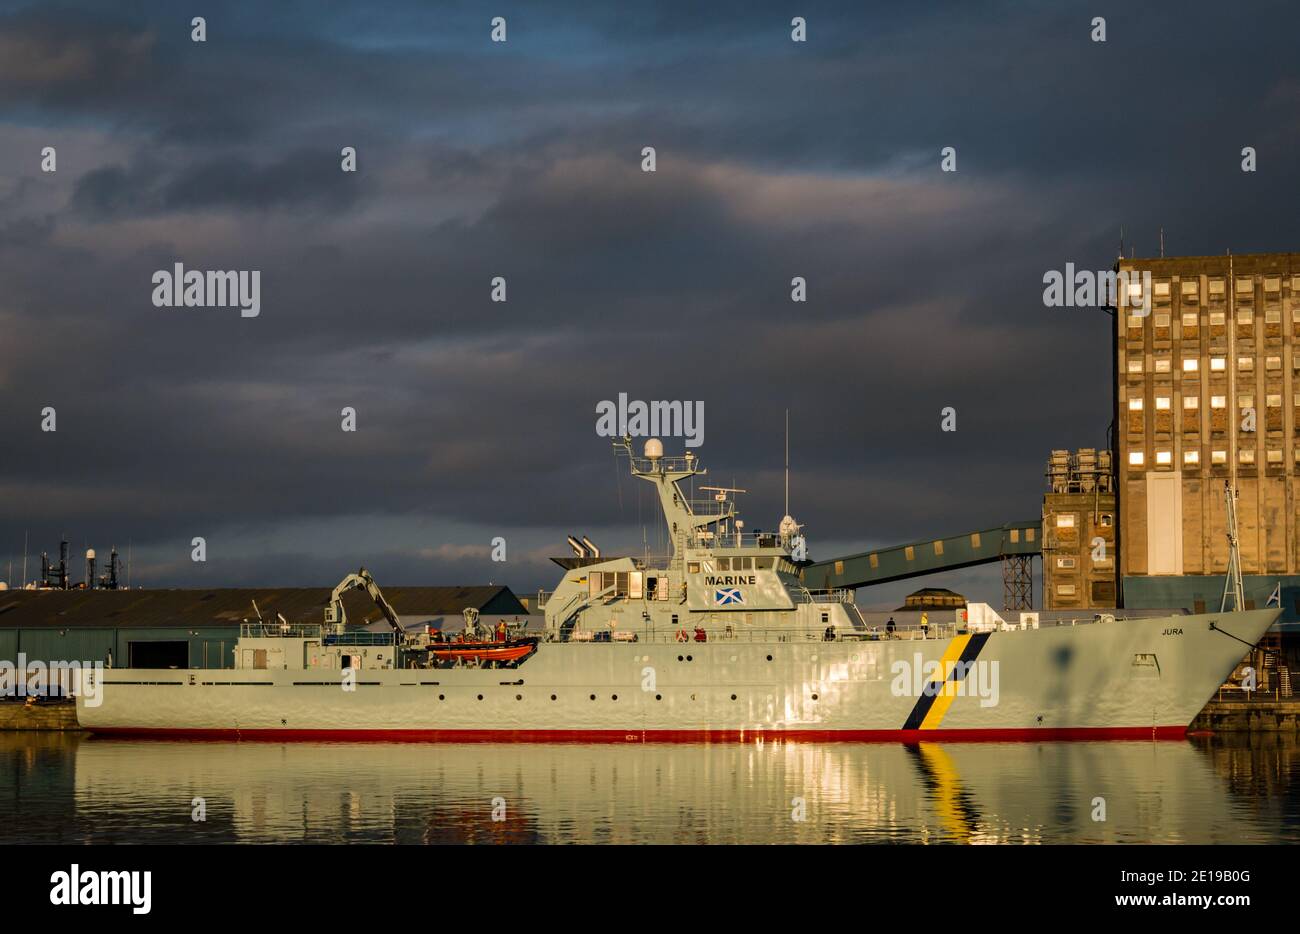 MPV Jura, Scottish Government Fisheries marine Protection ship & Industrial grain Silo with reflections, Imperial Dock, Leith, Edinburgh, Schottland, UK Stockfoto